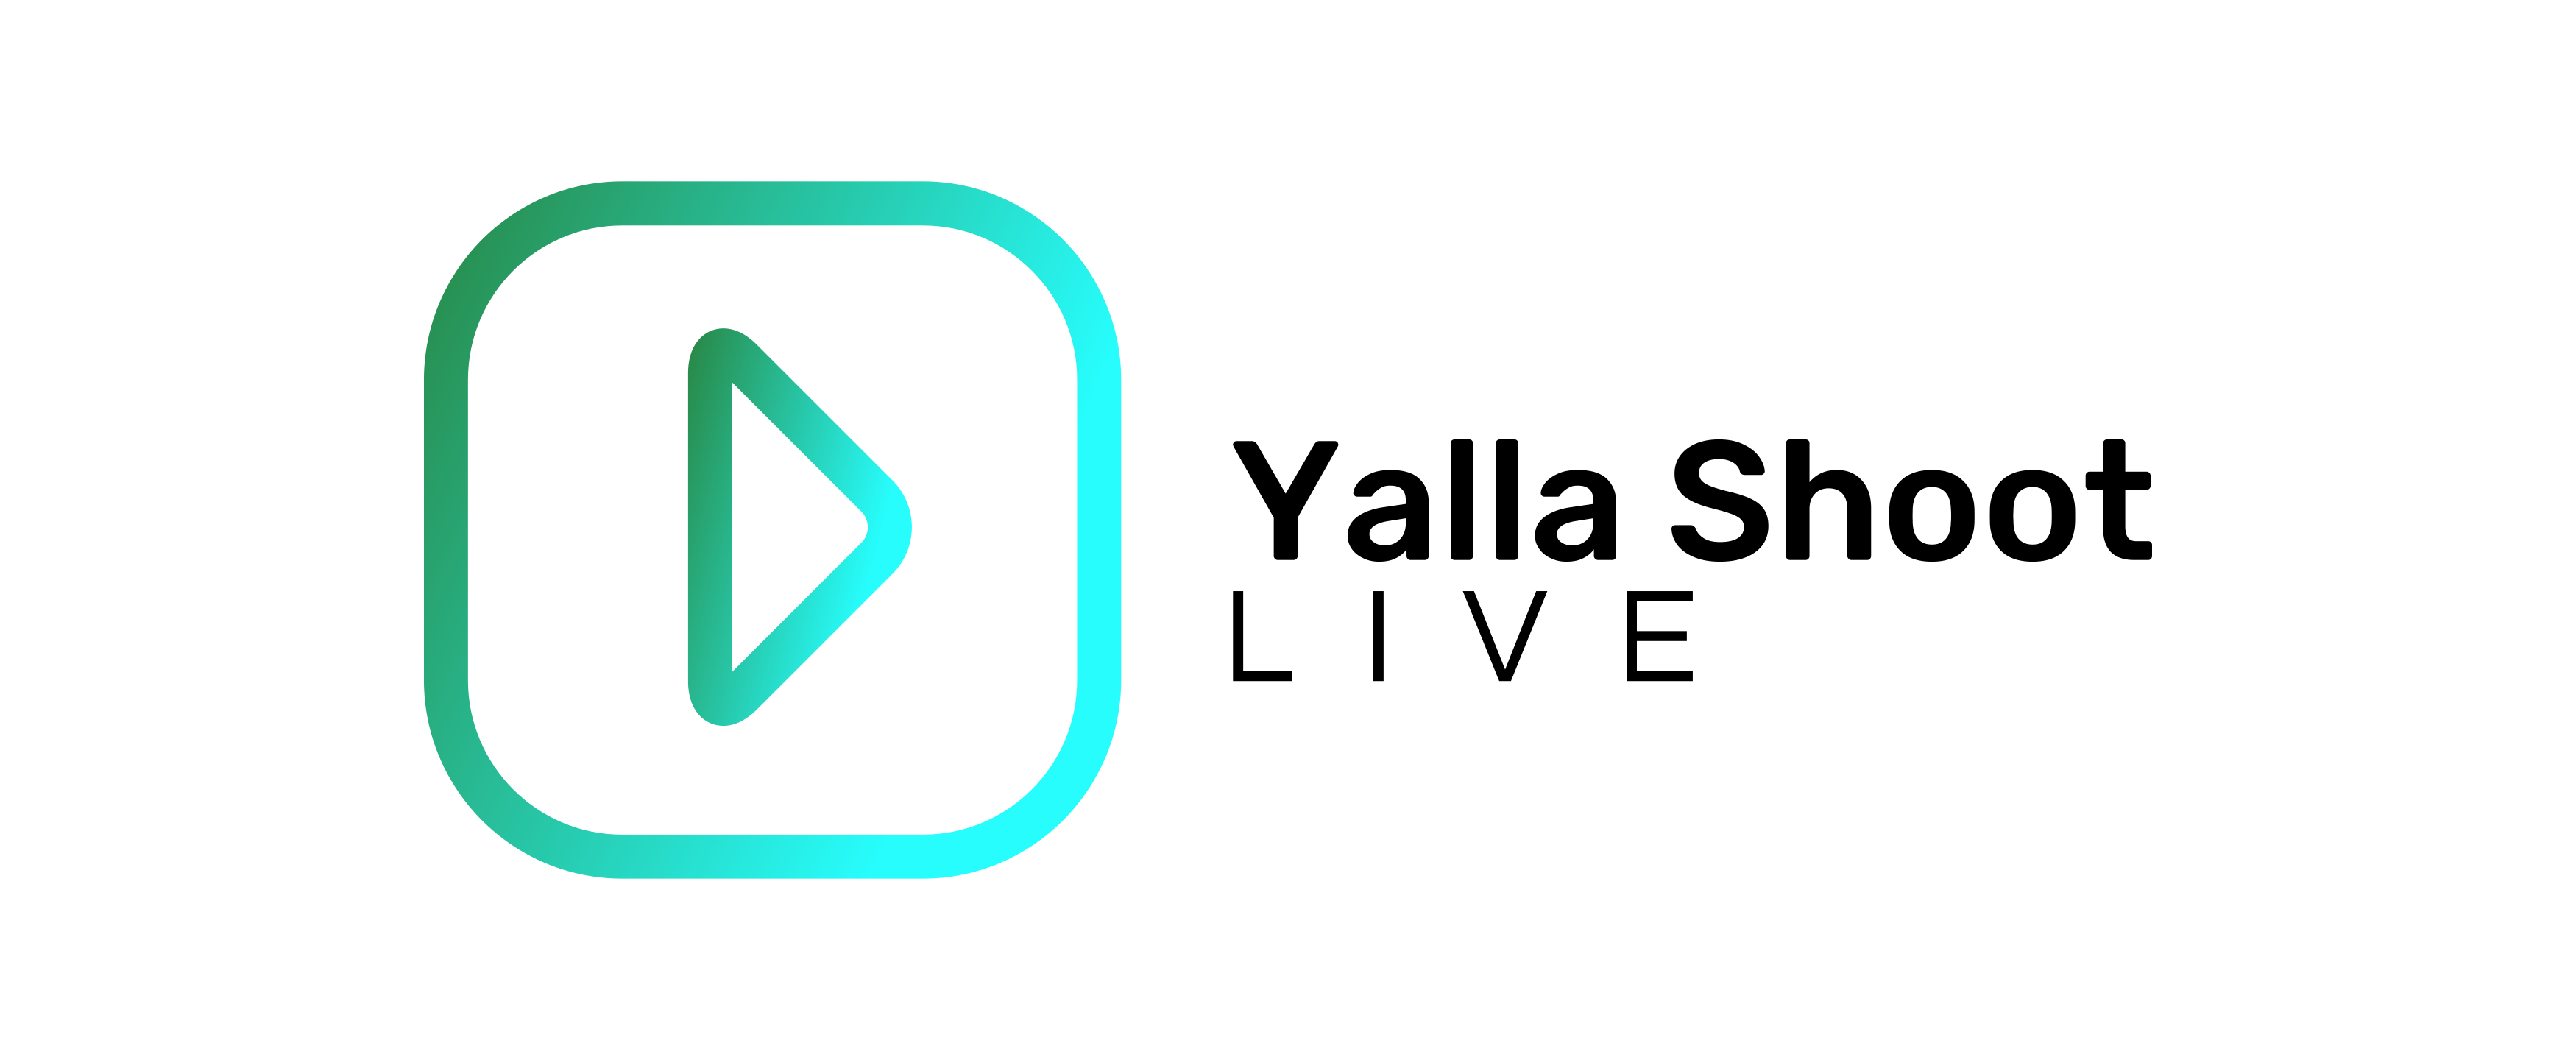 Standing Serie A -   -  Yalla Shoot Live English